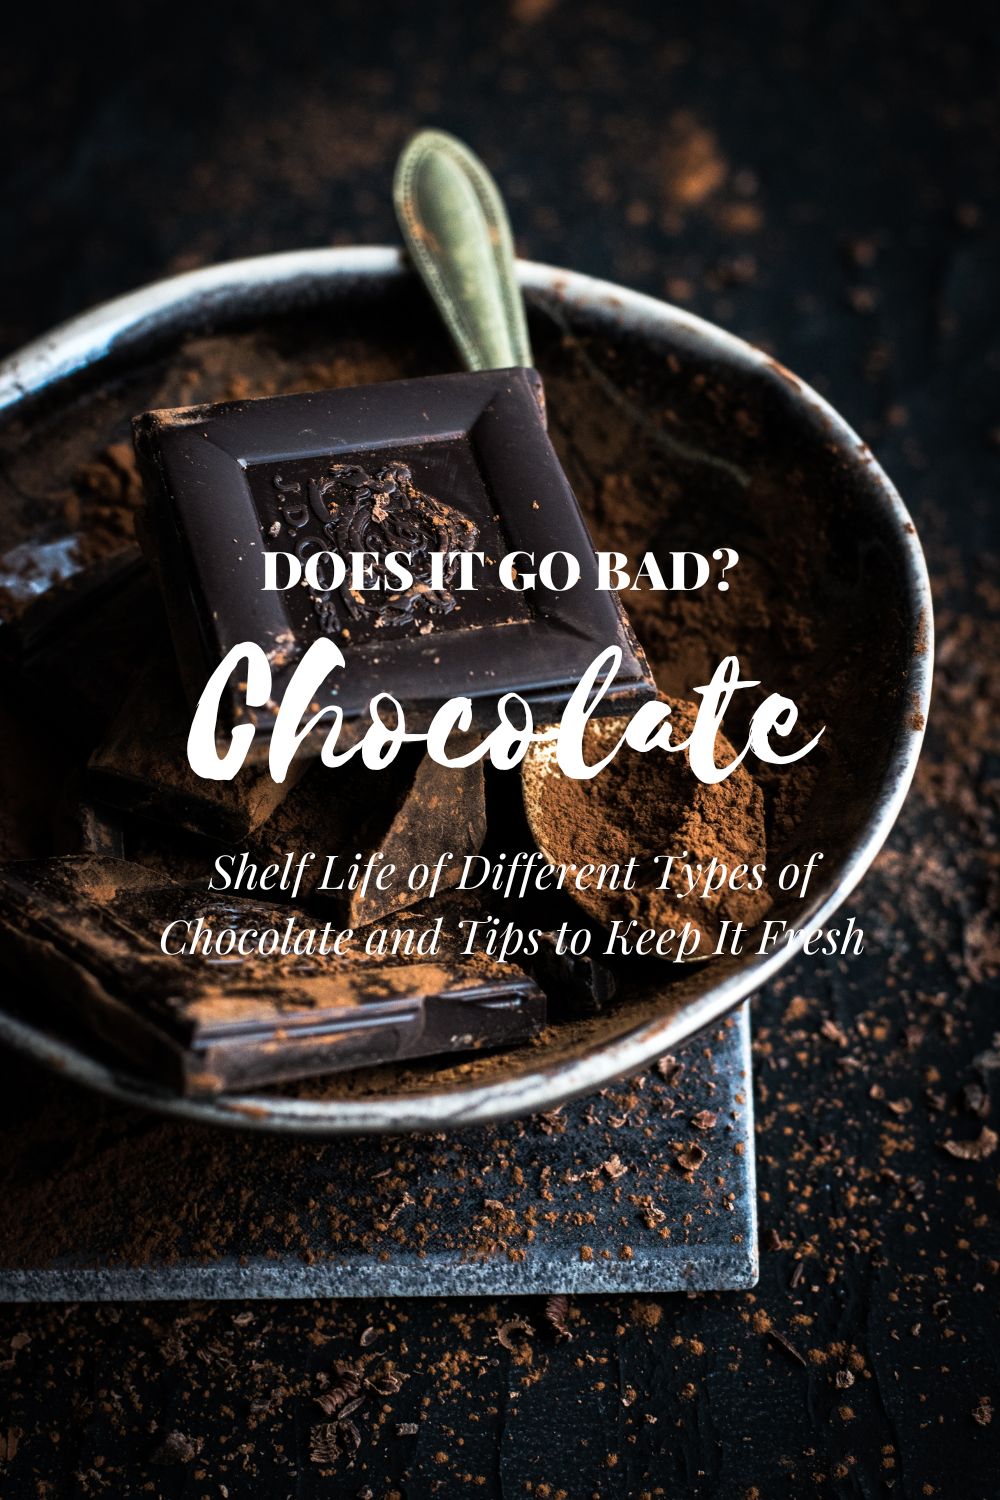 Does Chocolate Go Bad? Shelf Life of Different Types of Chocolate and Tips to Keep It Fresh